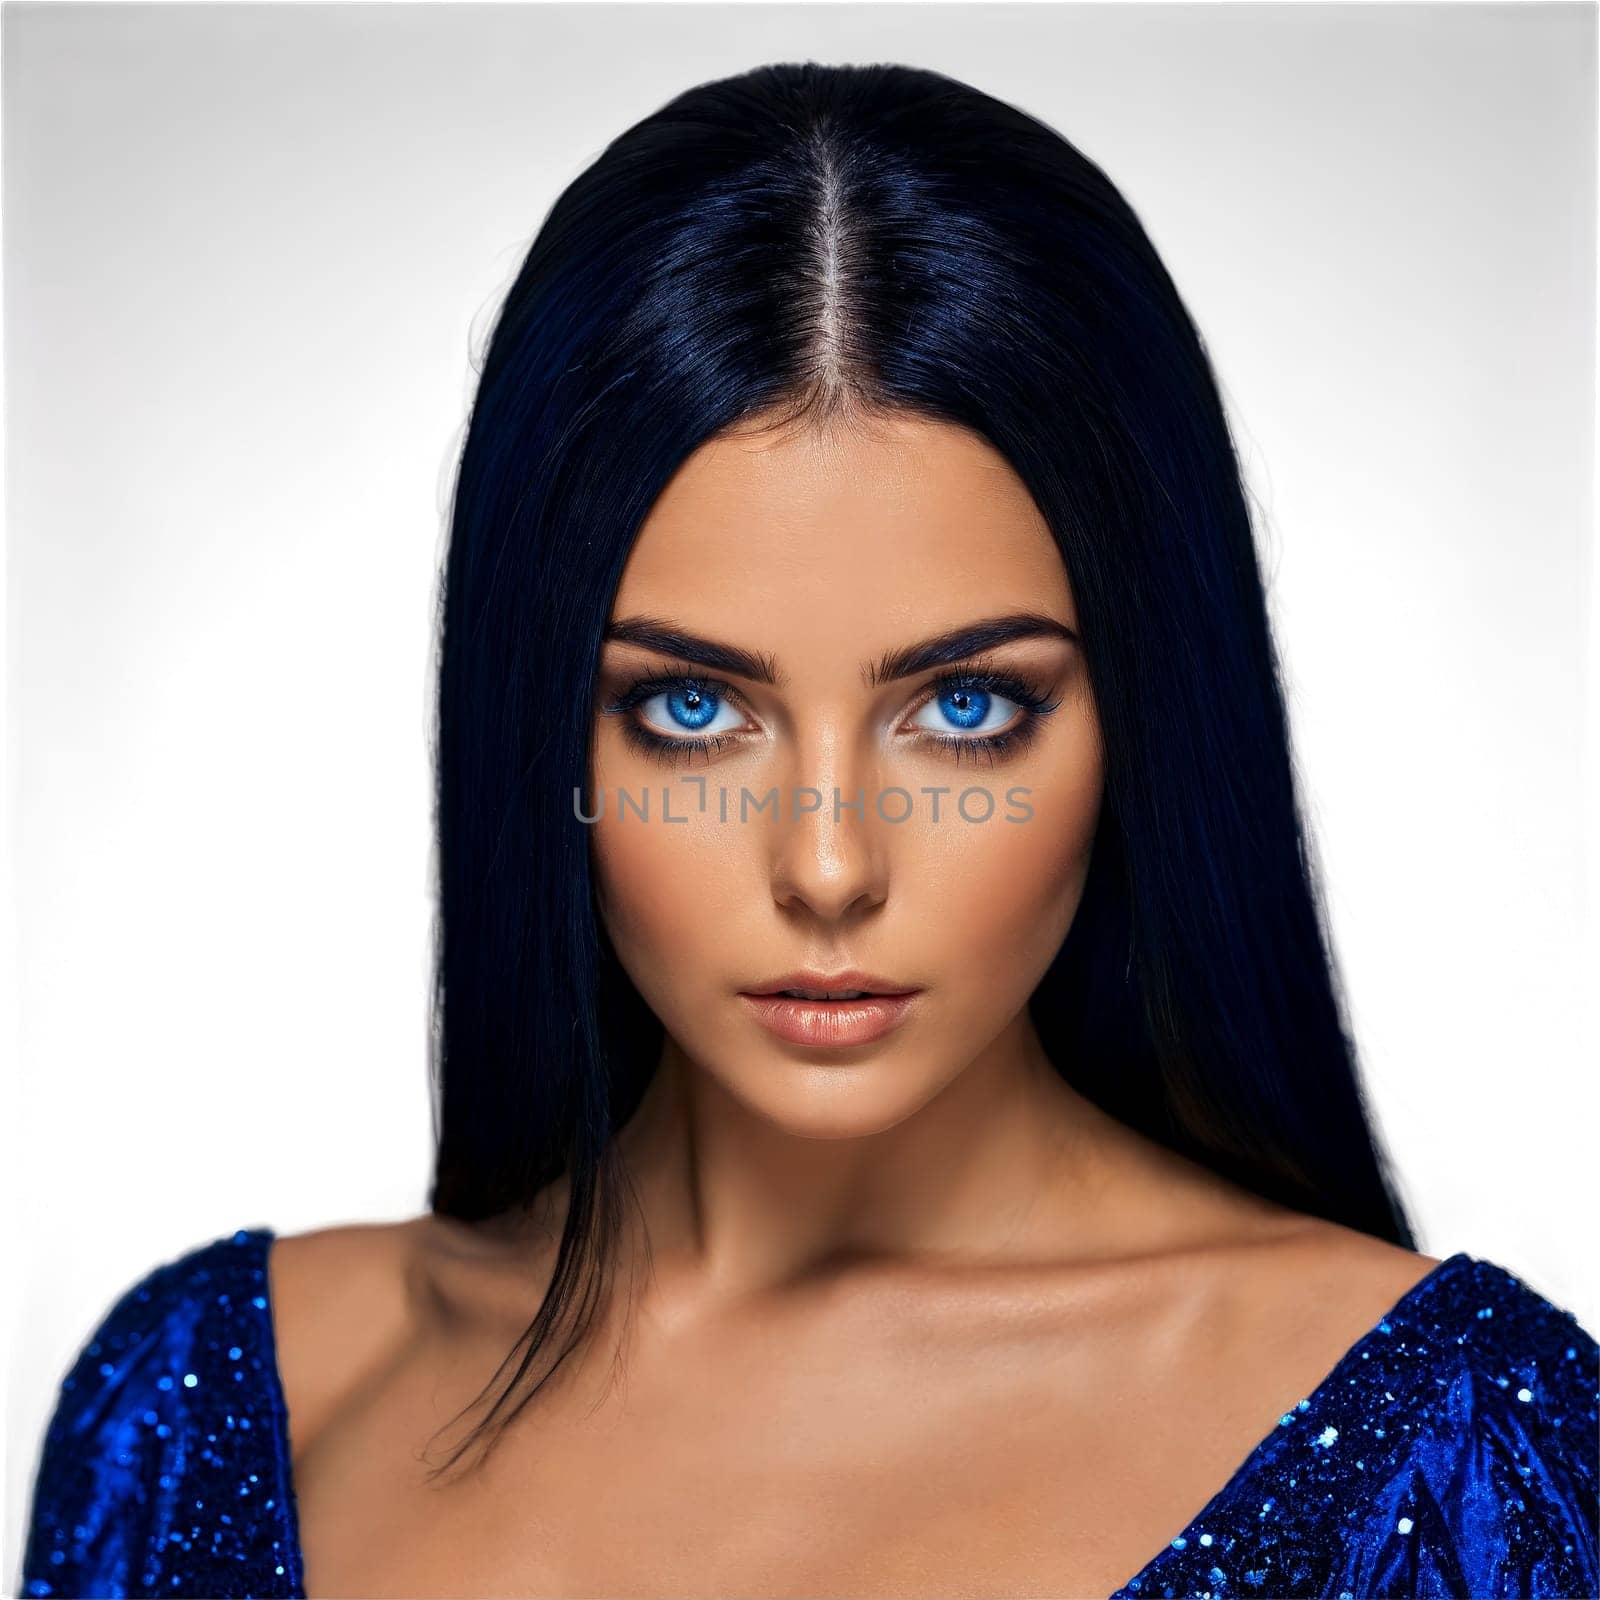 Midnight Blue A mysterious woman with long straight black hair and piercing blue eyes wearing by panophotograph